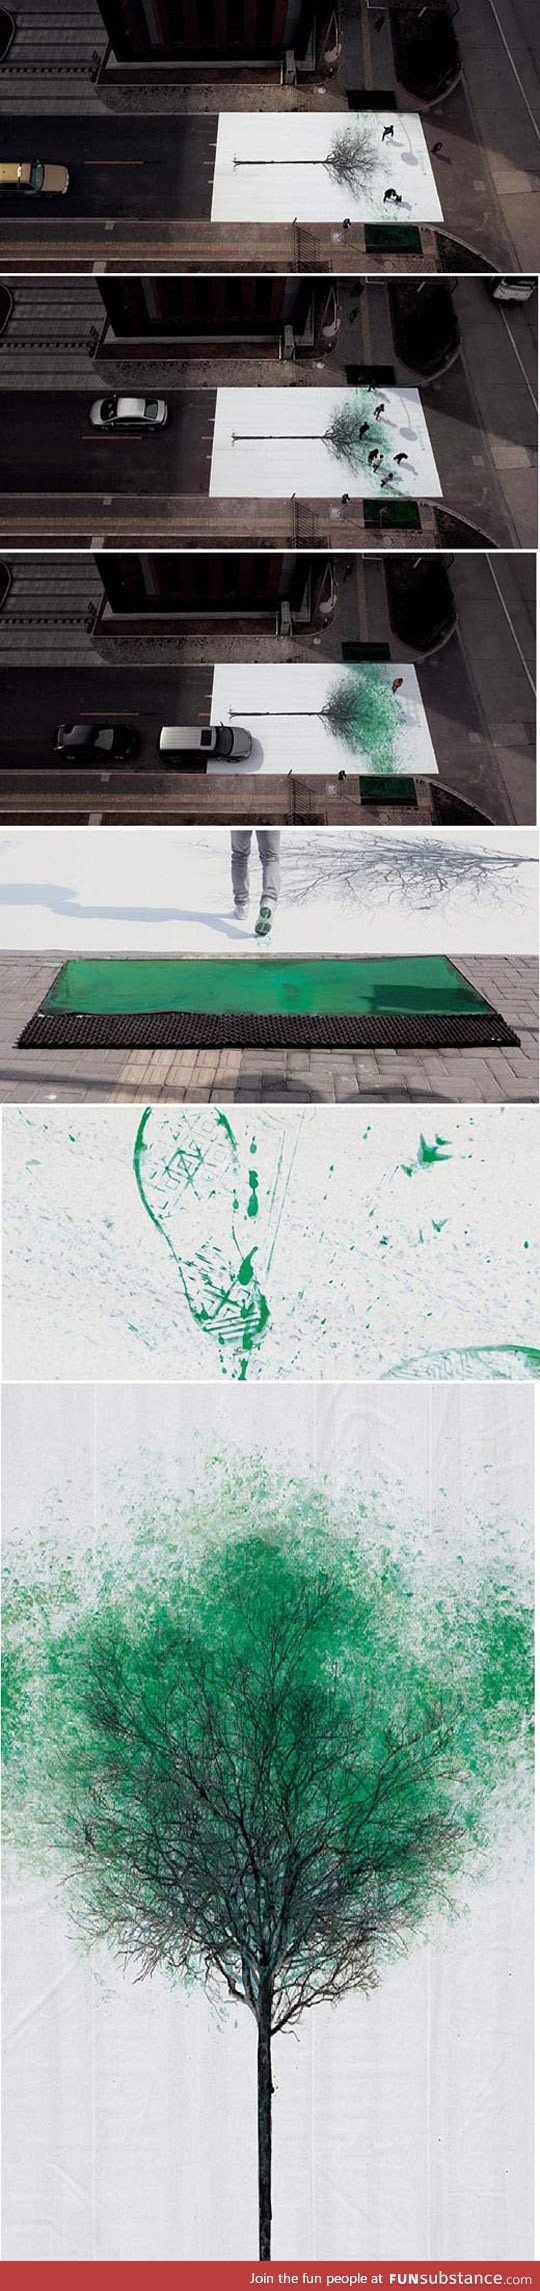 Pedestrian crossing turns footsteps into leaves